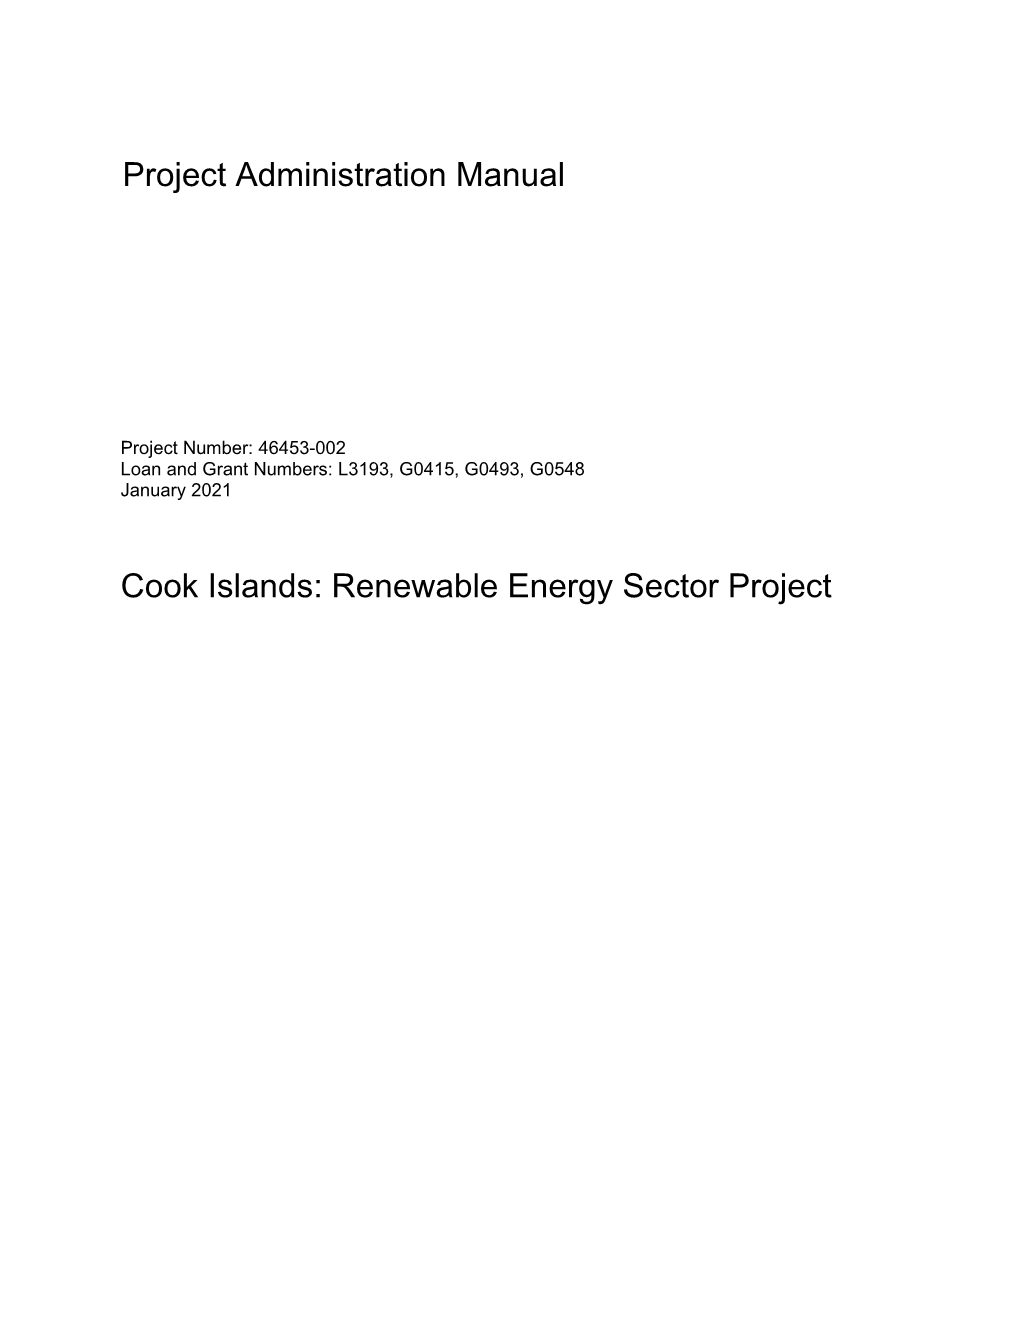 Renewable Energy Sector Project Project Administration Manual